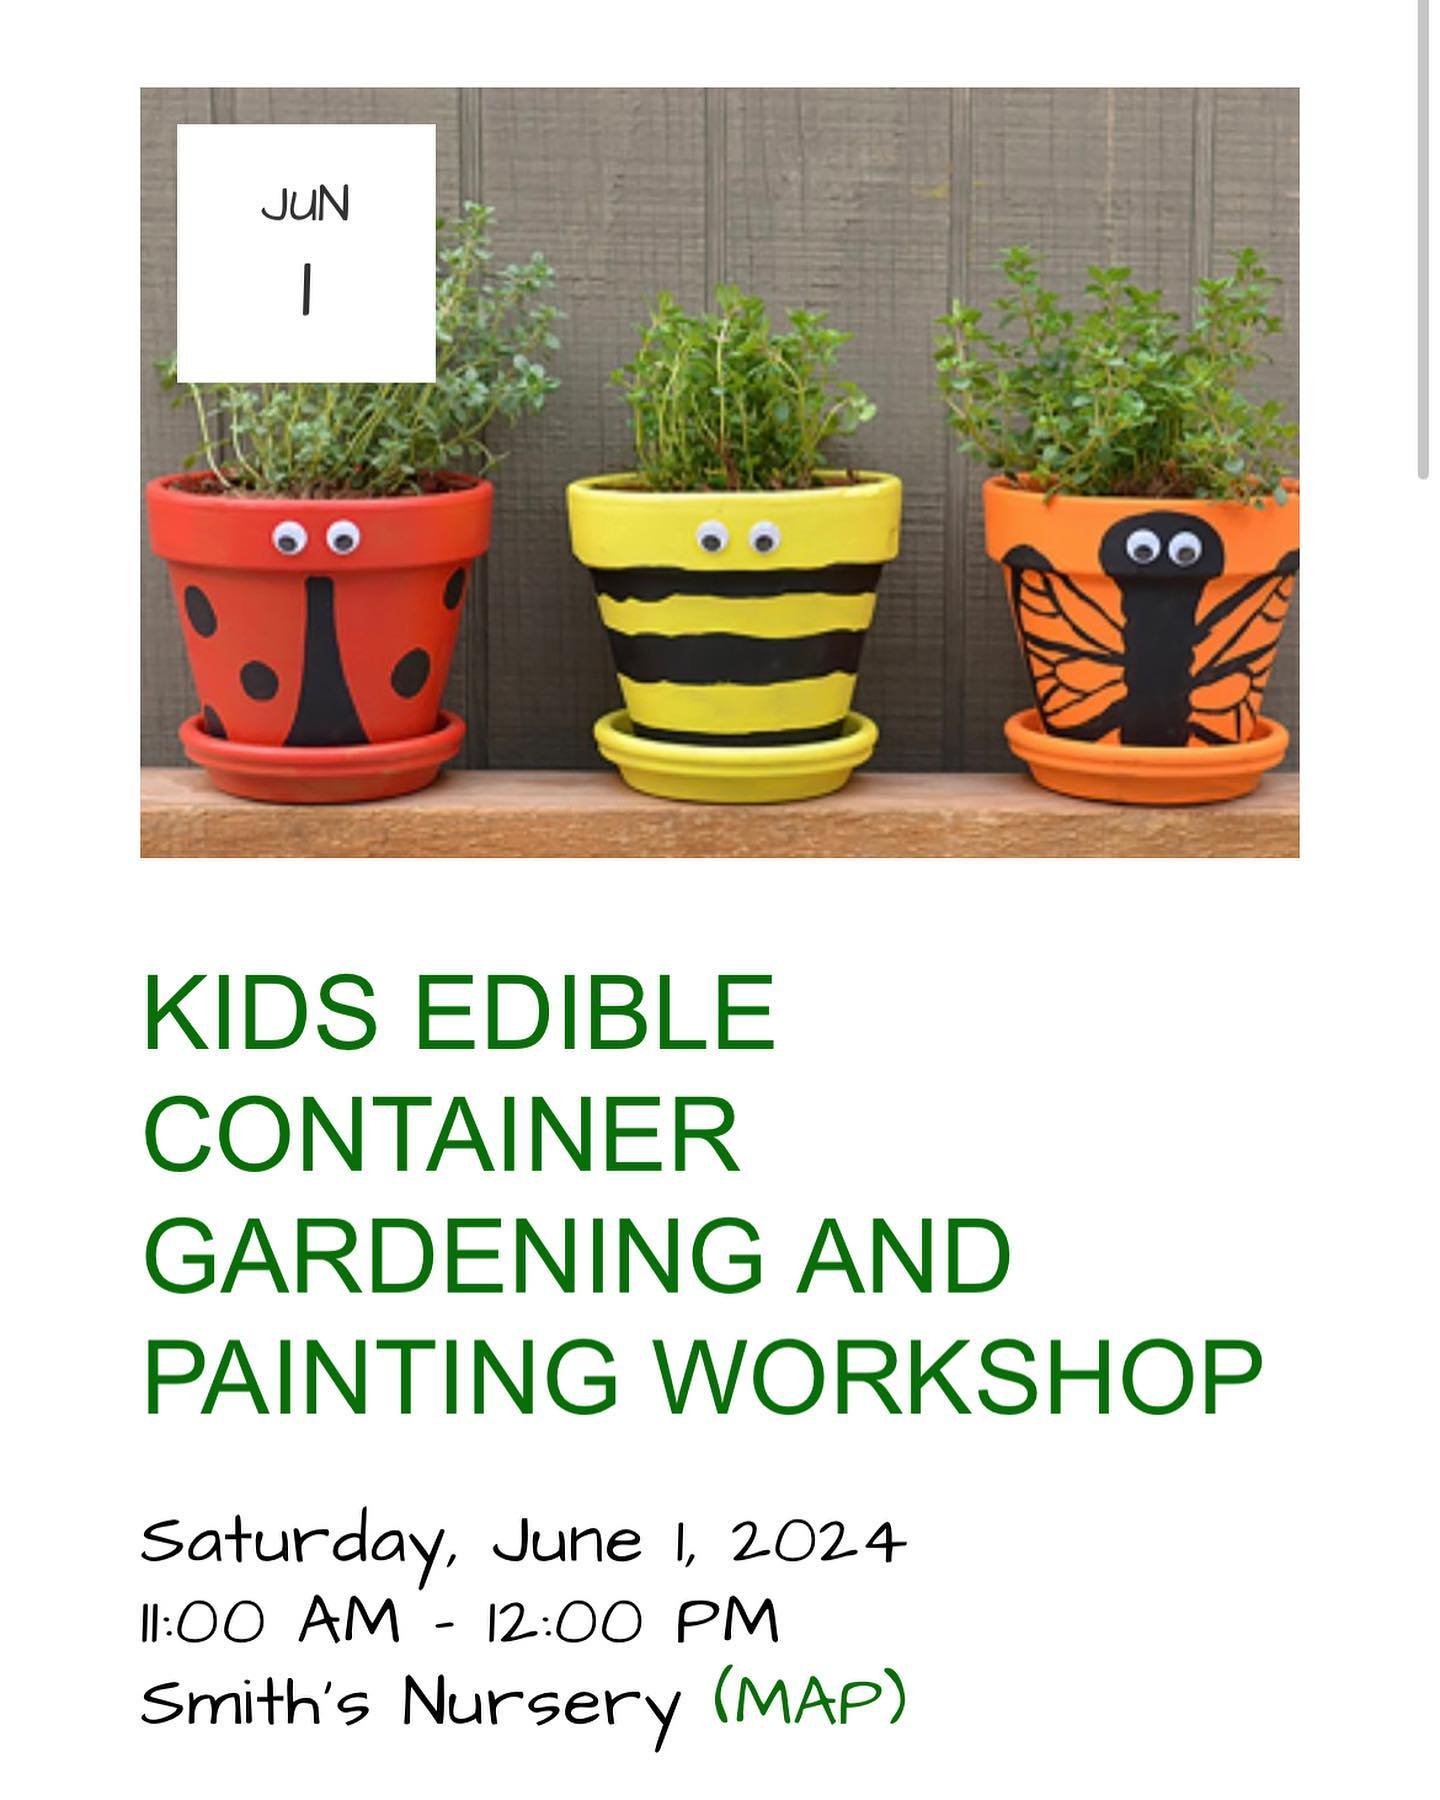 Check out our upcoming workshop happening on Saturday, June 1st at 11 am!

This workshop is geared towards kids ages 3 and up. Parental or adult assistance is required. Your child will get to create their own bee-utiful bumblebee, ladybug, or butterf